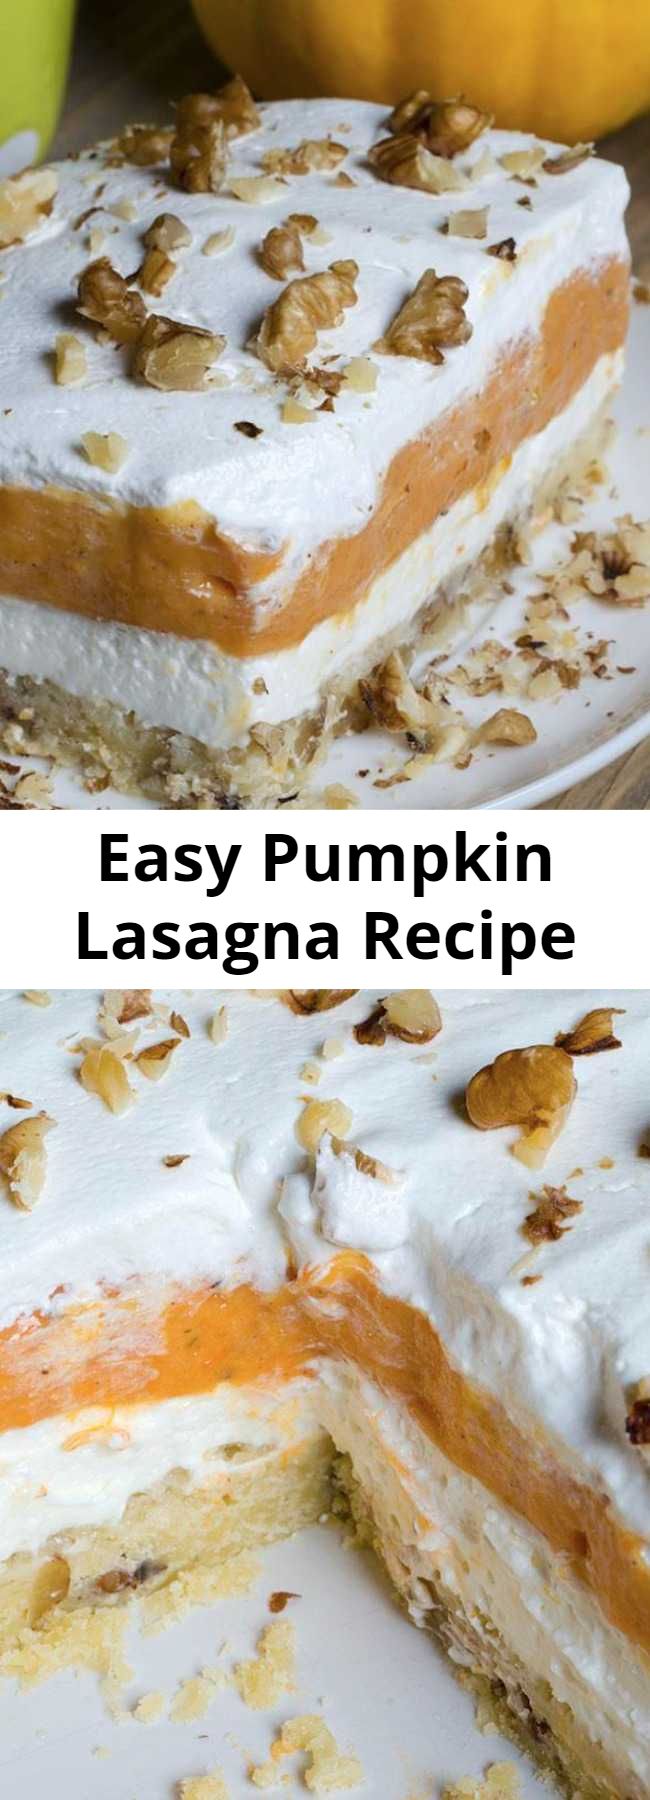 Easy Pumpkin Lasagna Recipe - This awesome Pumpkin Lasagna recipe has layers of moist pumpkin cake, creamy cheesecake and a crunchy crust. It’s a delicious dessert recipe that’s super fun to make and perfect for the fall! #pumpkin #lasagna #desserts